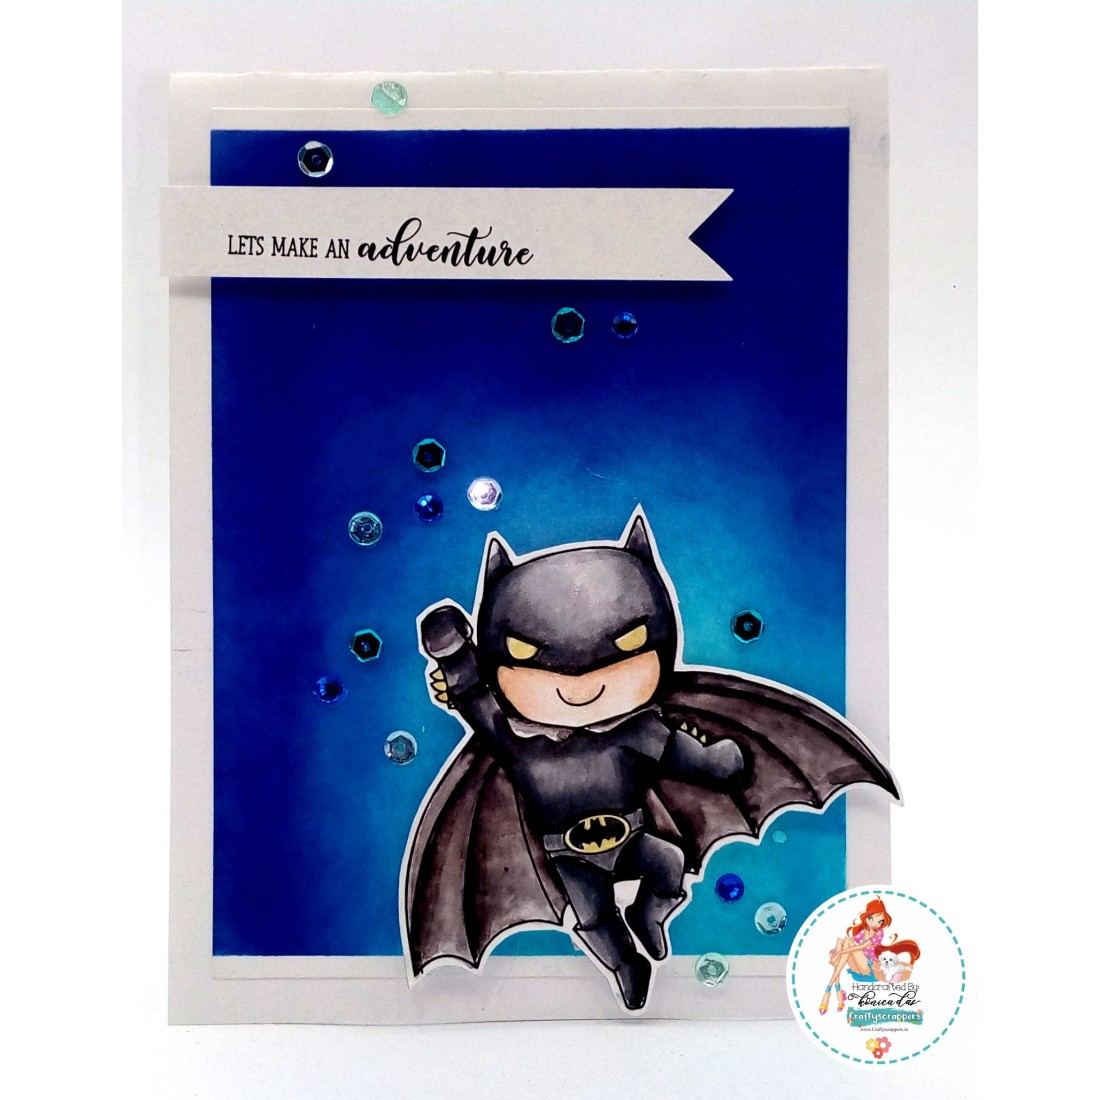 Craftyscrappers Stamps- SUPERHEO BIRTHDAY